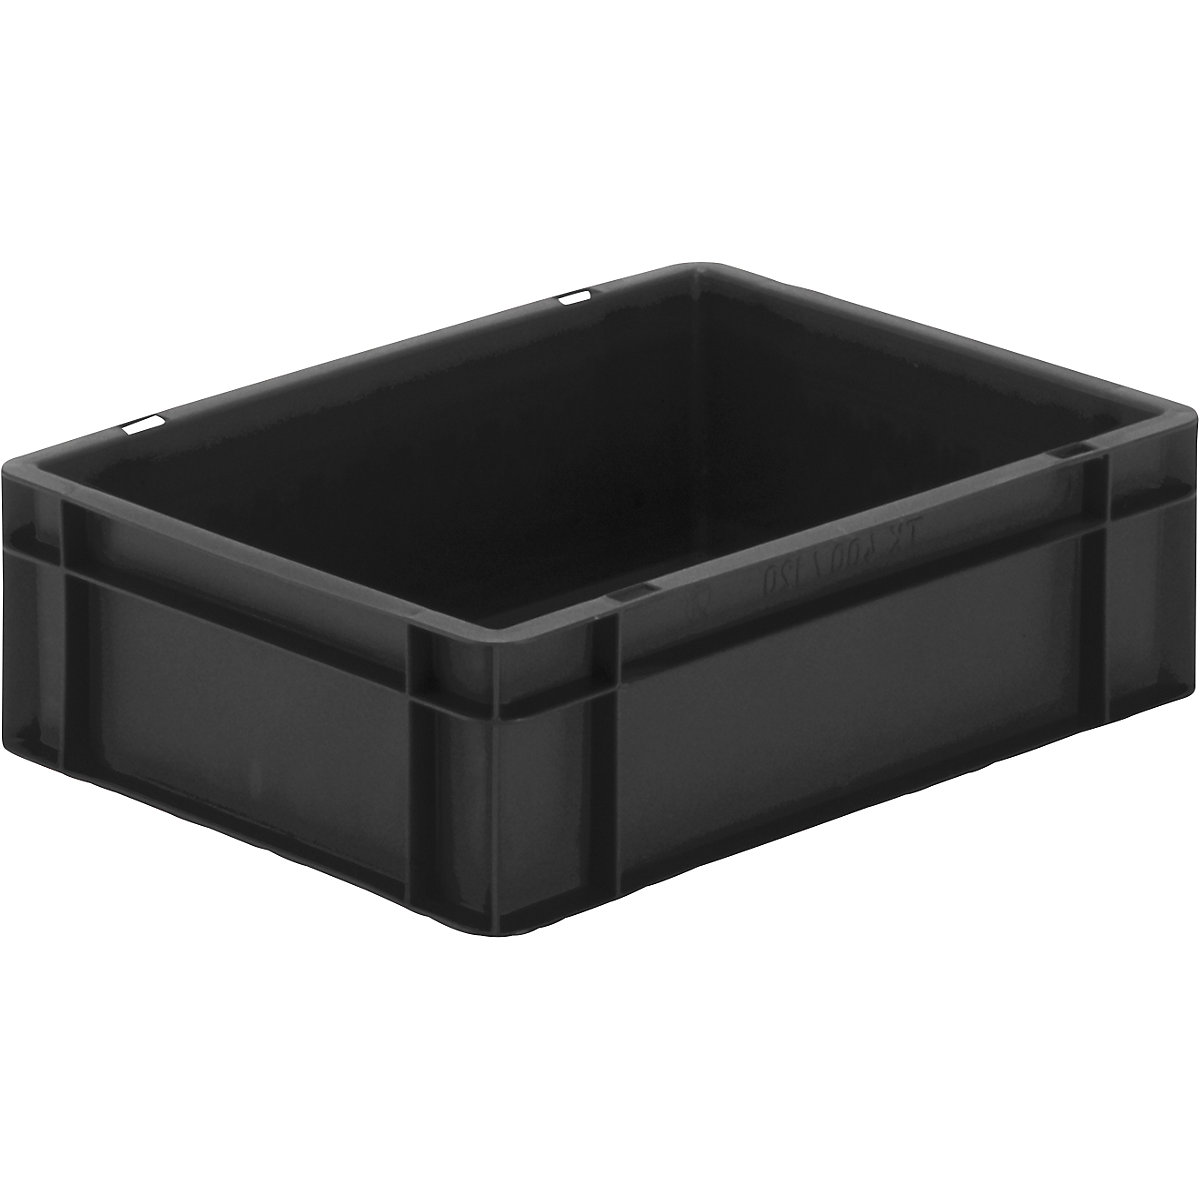 ESD stacking container, made of polypropylene, LxWxH 400 x 300 x 120 mm, pack of 4-7